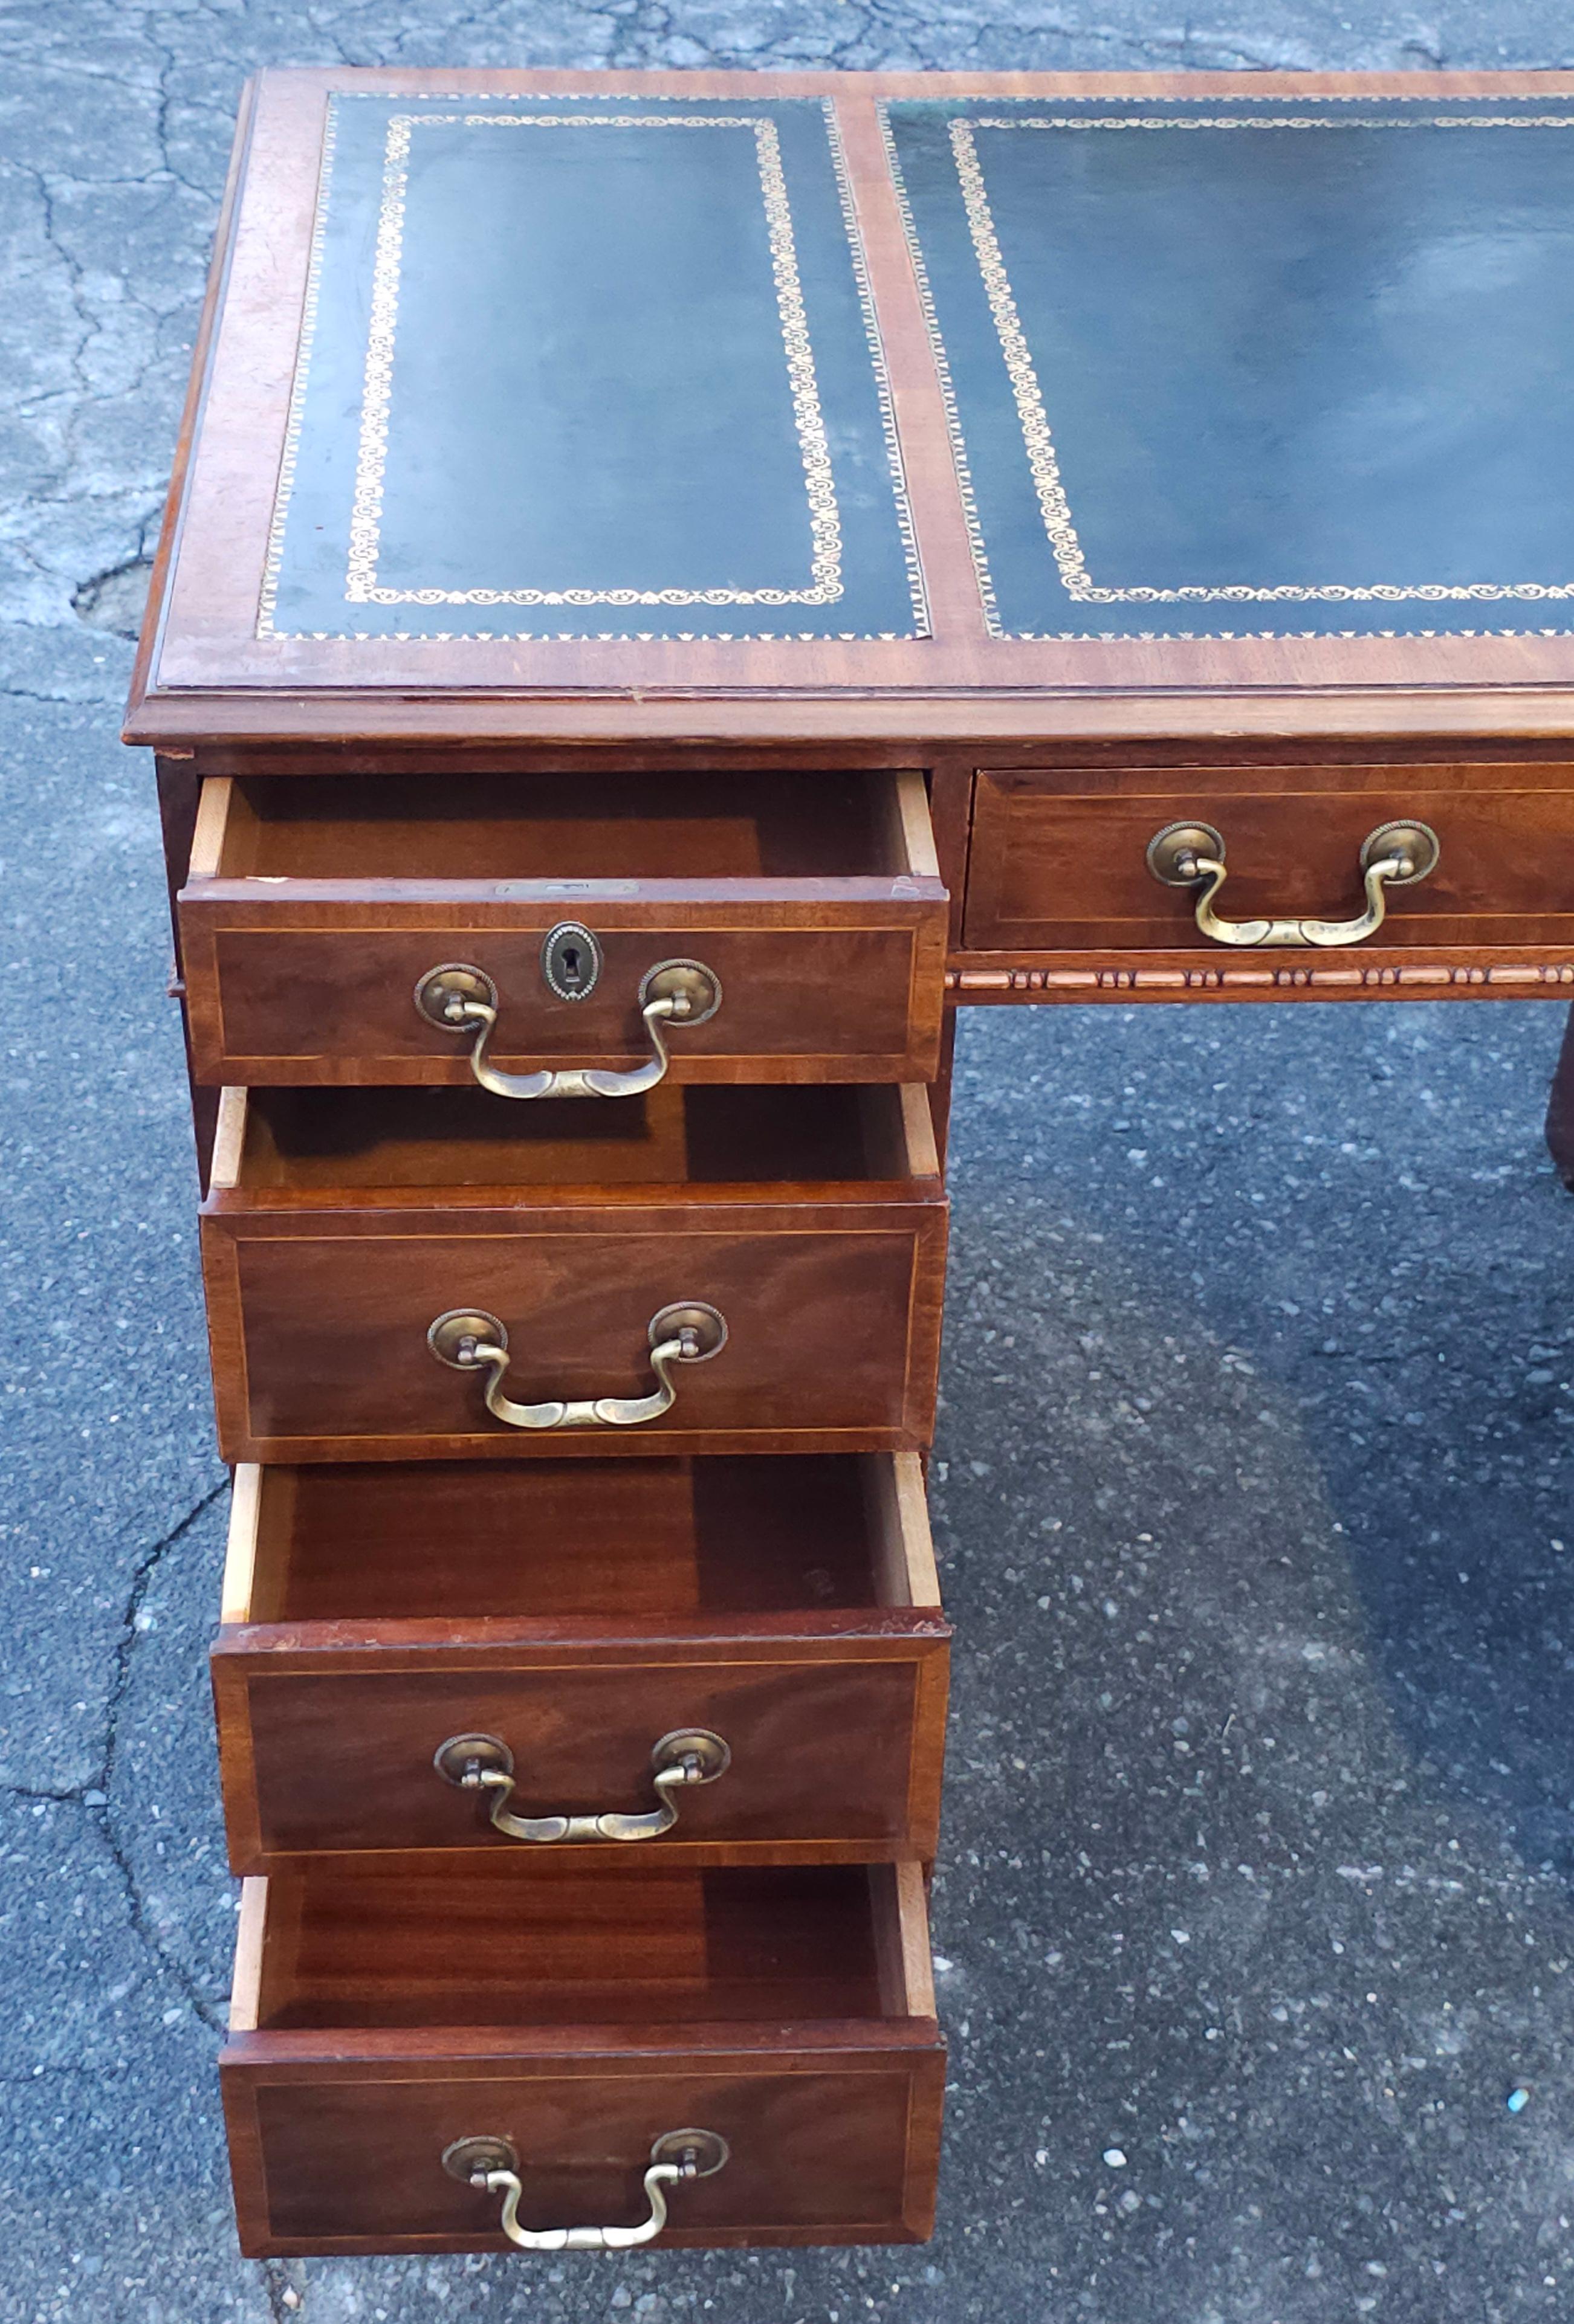 Hespeler Furniture Chippendale Mahogany Inlays and Green Leather Top Desk For Sale 2